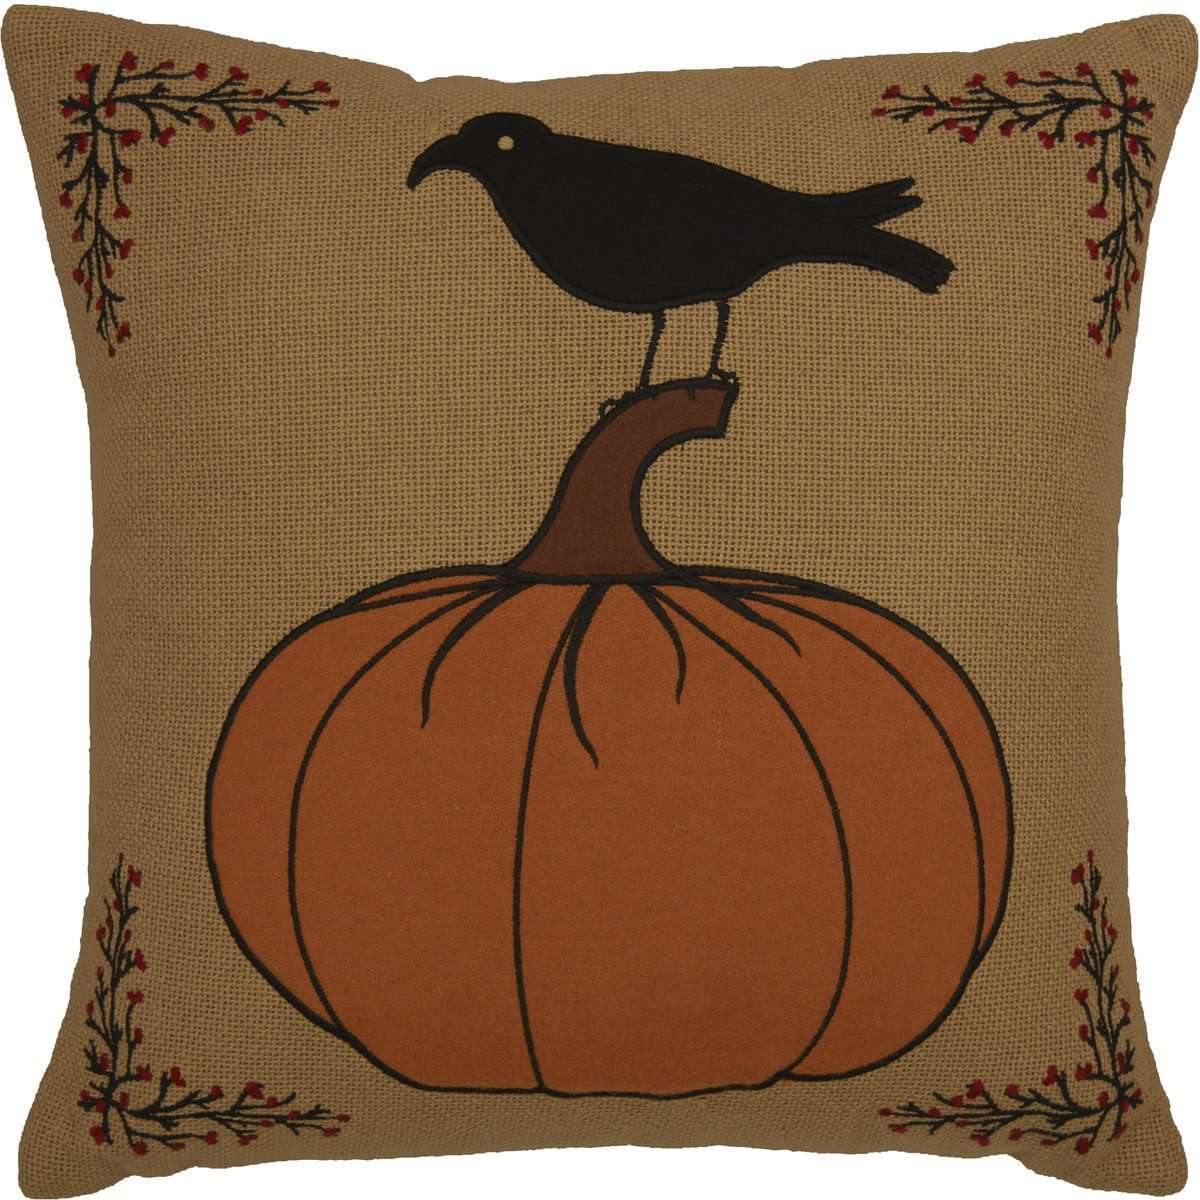 Heritage Farms Pumpkin and Crow Pillow 18x18 VHC Brands